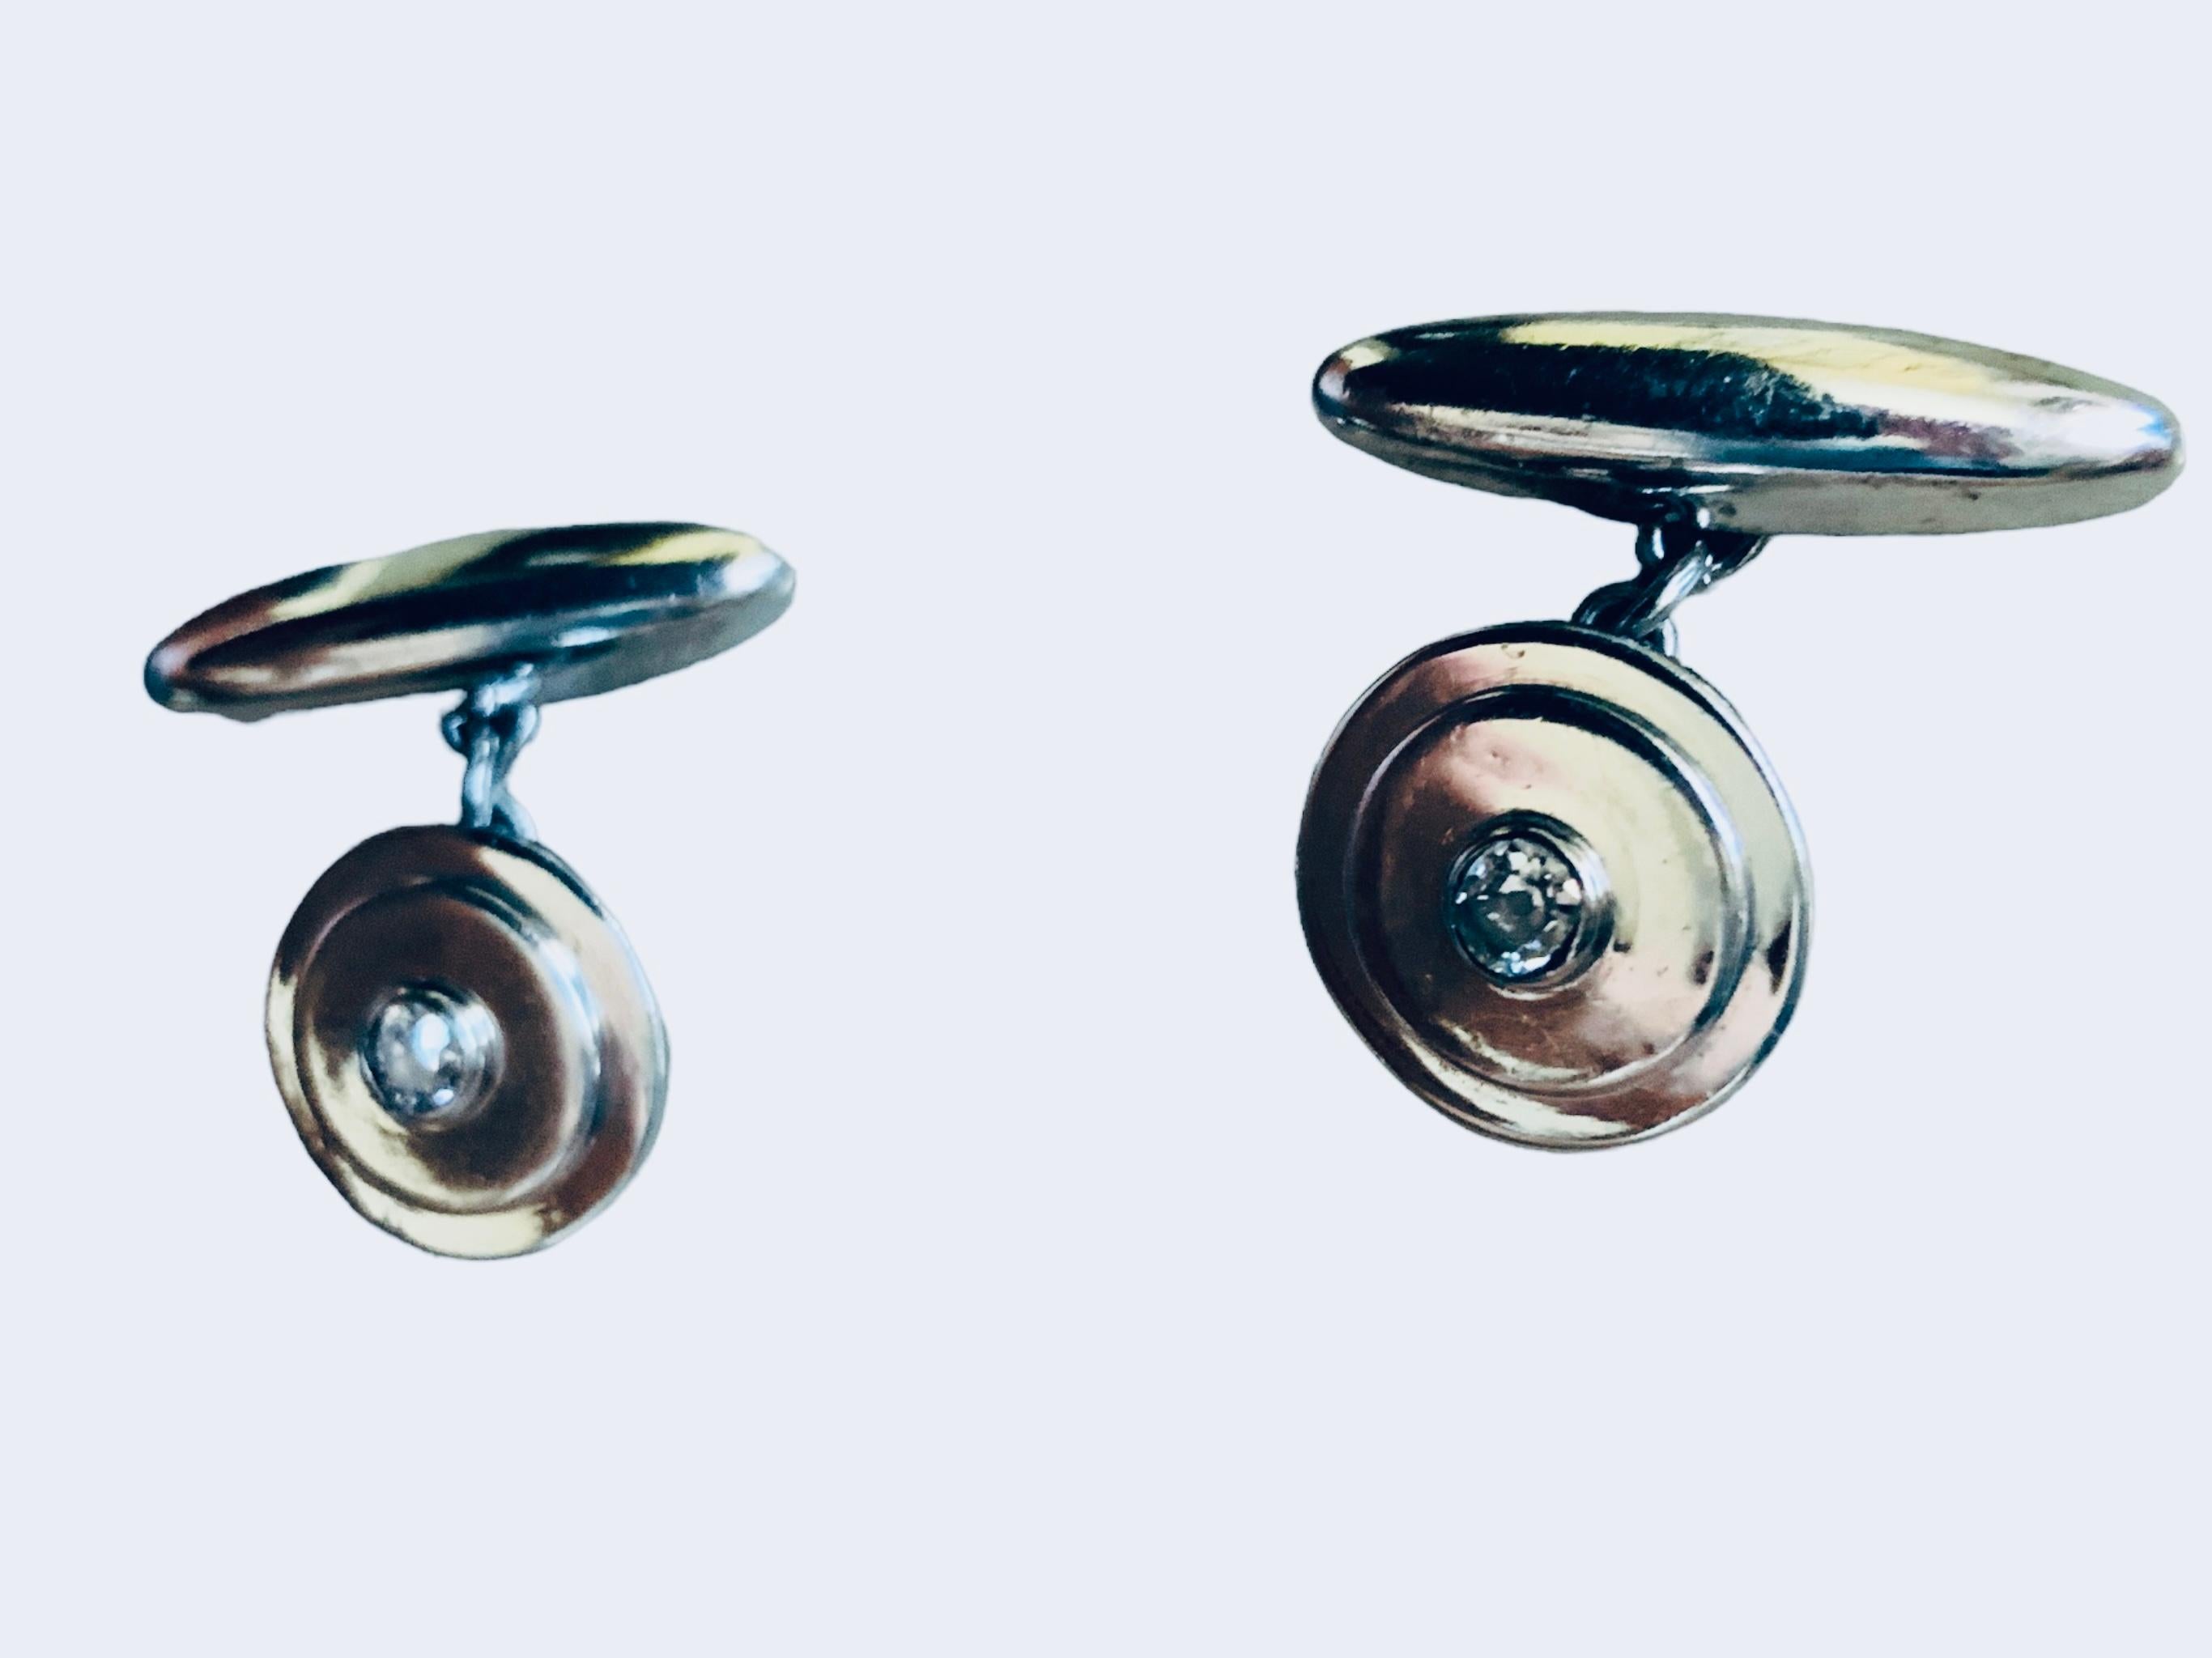 This is a 18K white gold chain link pair of cufflinks. It depicts a disc shaped cufflinks decorated in the center with some pave round diamonds 